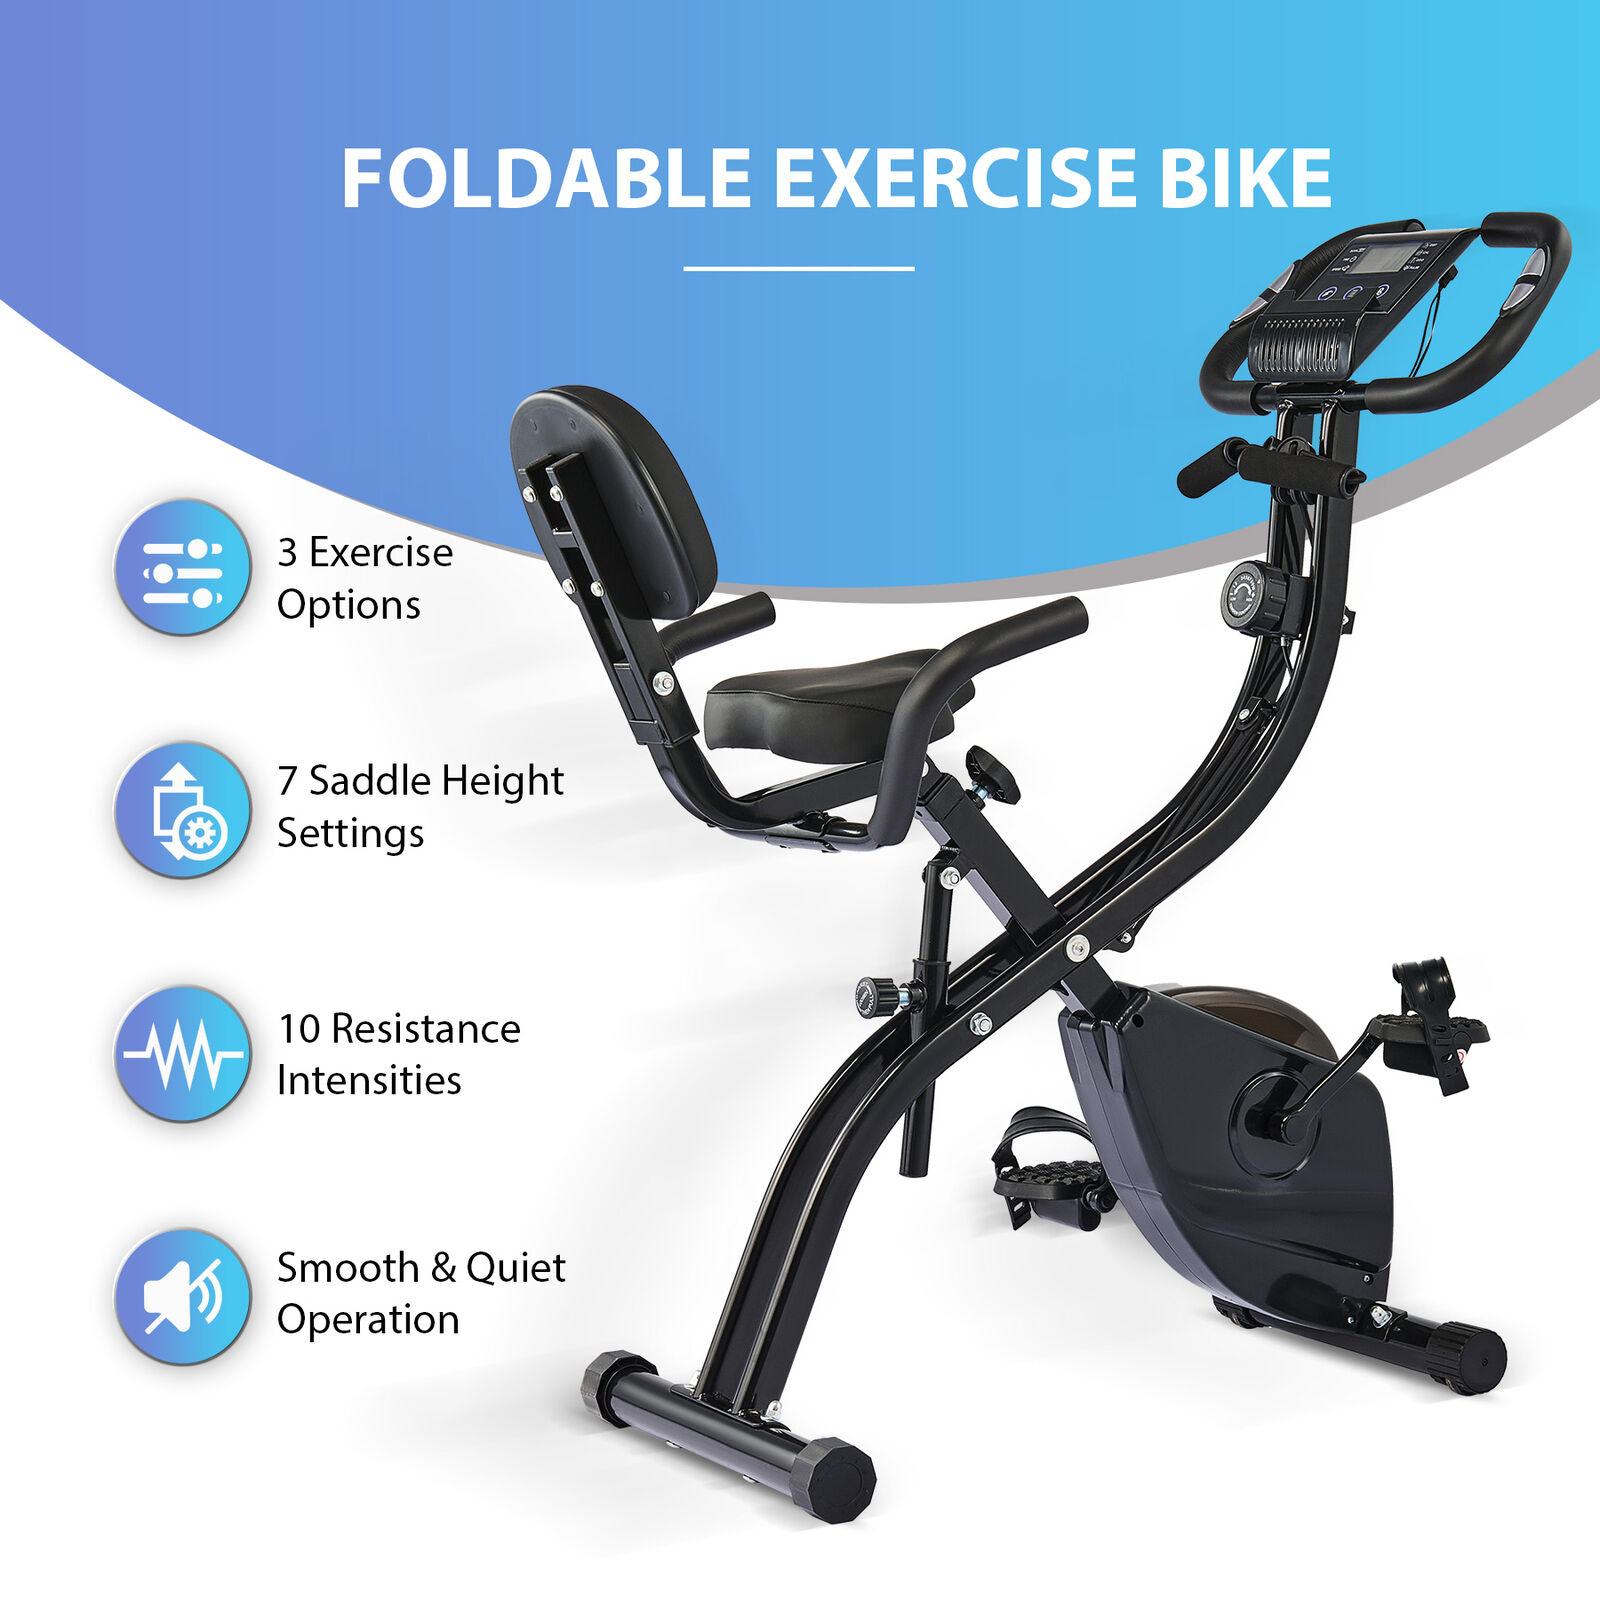 Cycling Bicycle Exercise Bike Stationary Fitness Home Equipment Cardio Workout